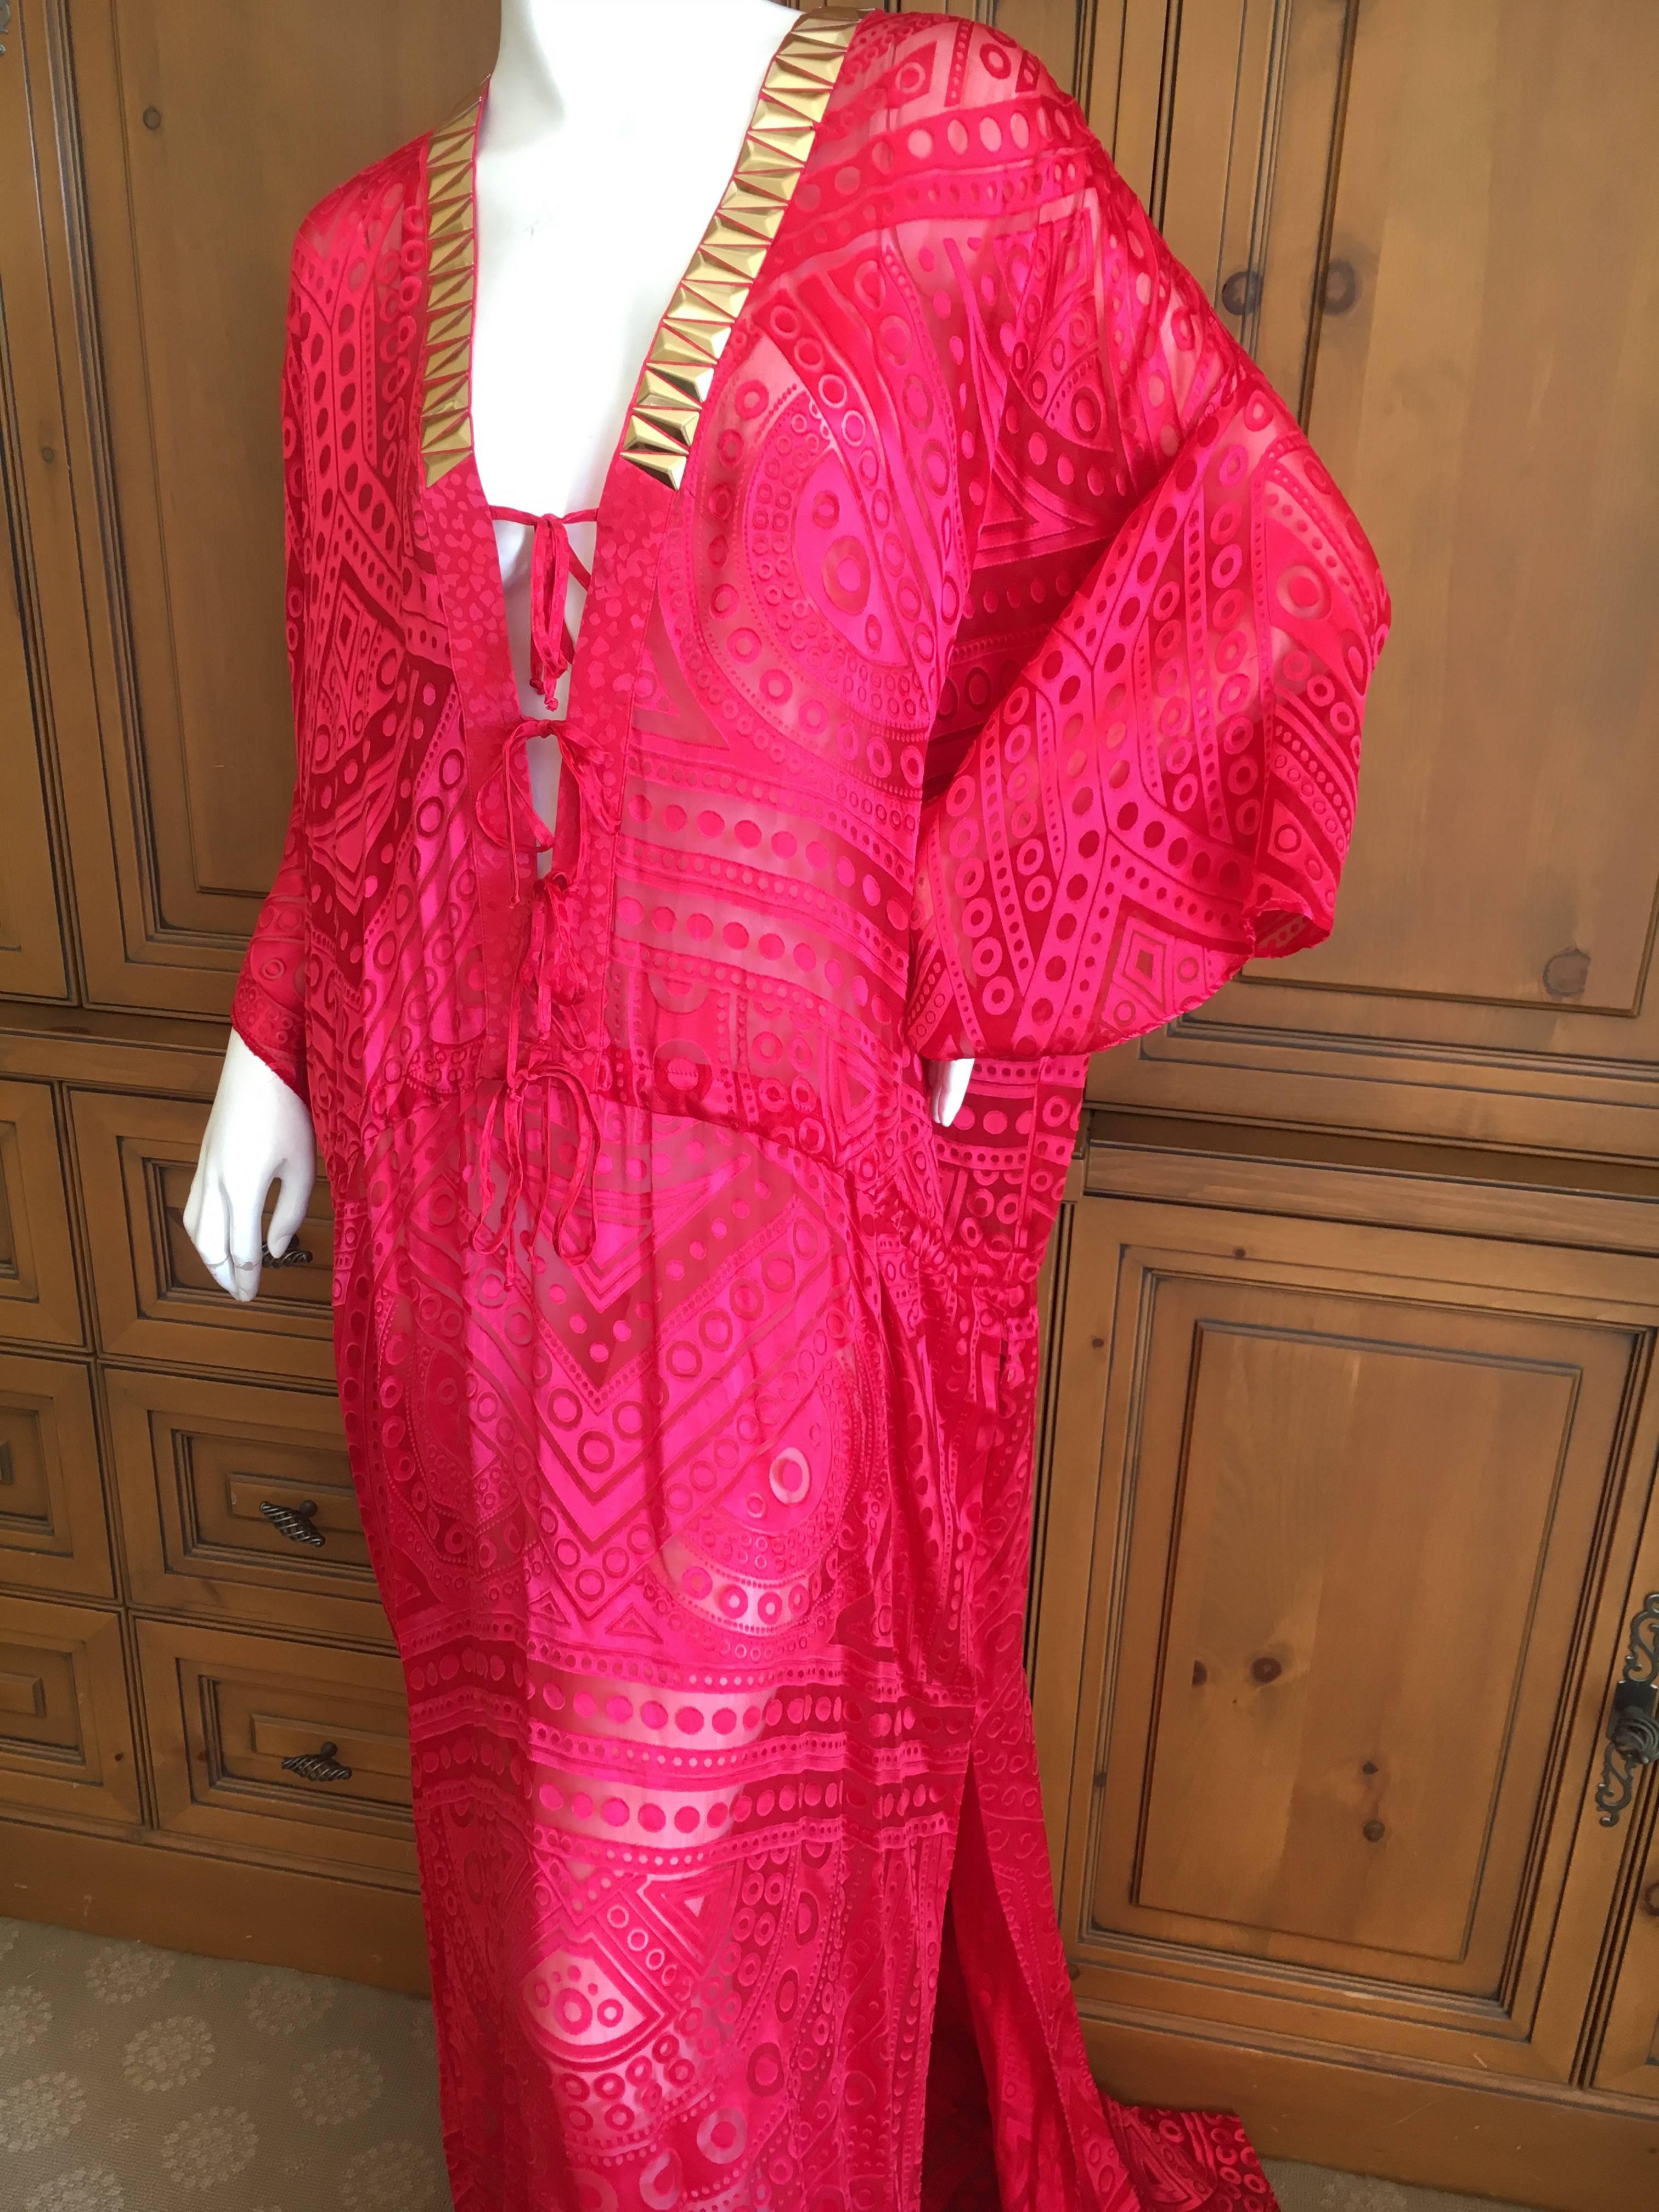 Women's or Men's Roberto Cavalli Sheer Red Caftan with Gold Embellishents for Just Cavalli NWT